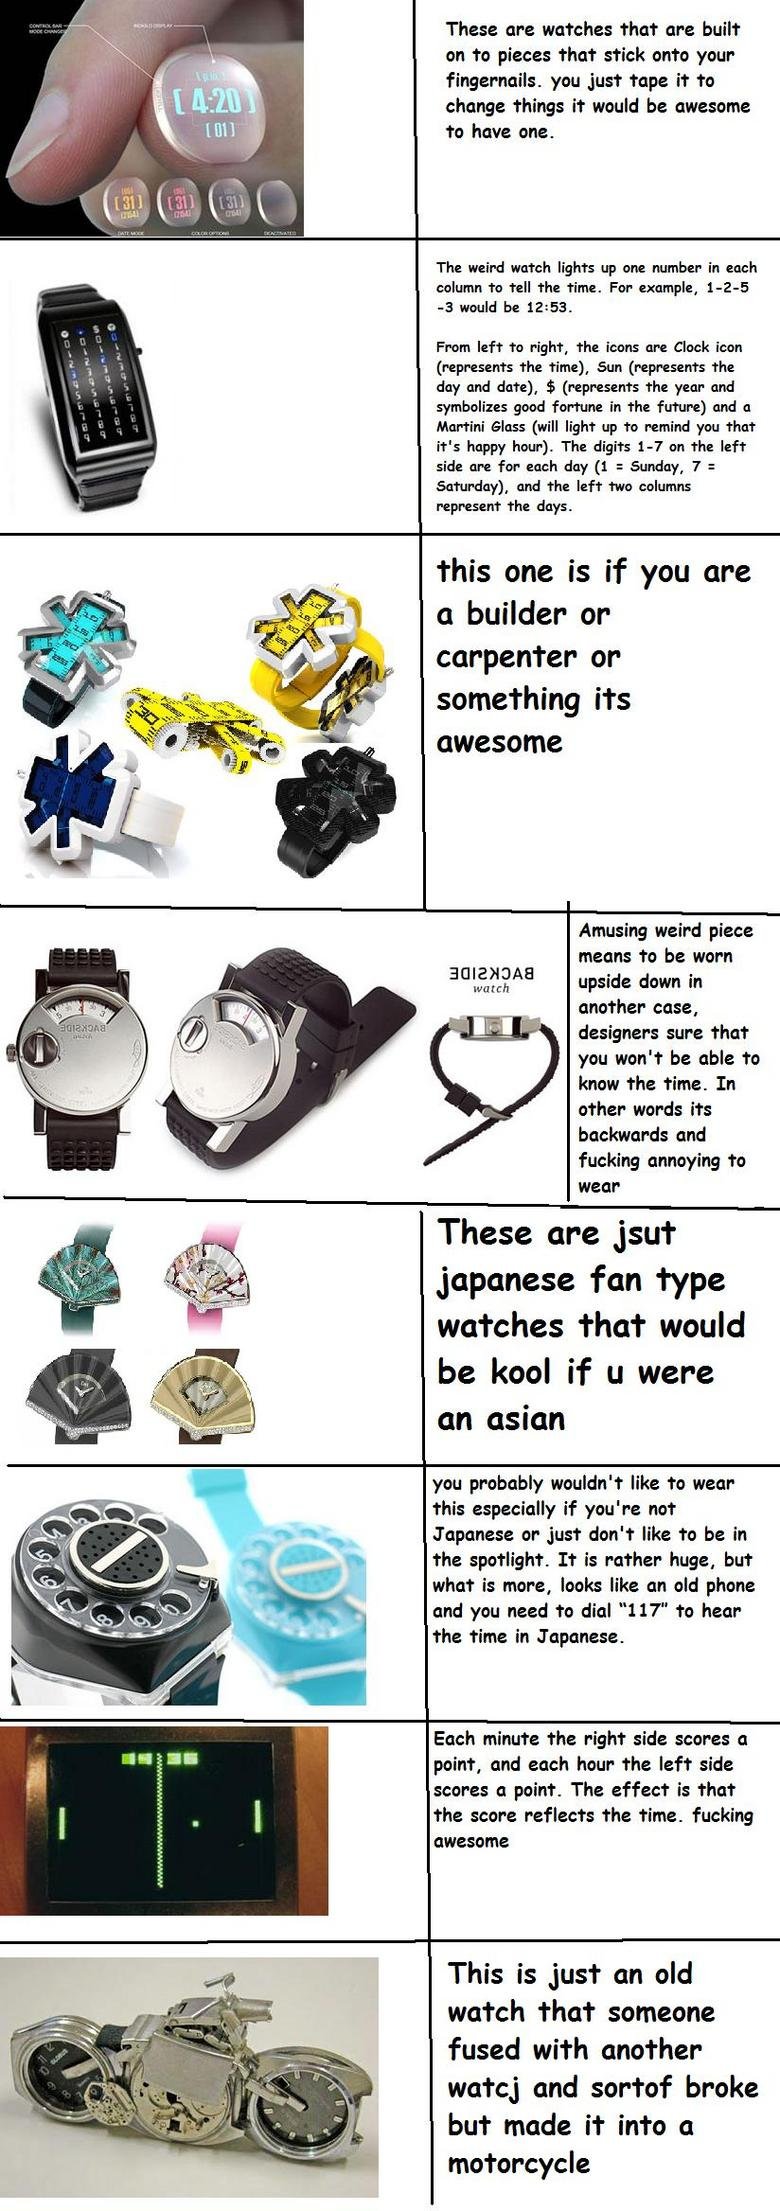 Weird Watches. EDIT: part 2 is now up! check it out &lt;a href=&quot;pictures/340070/Weird+Watches+2/&quot; target=blank&gt;funnyjunk.com/funnypictures/340070/W